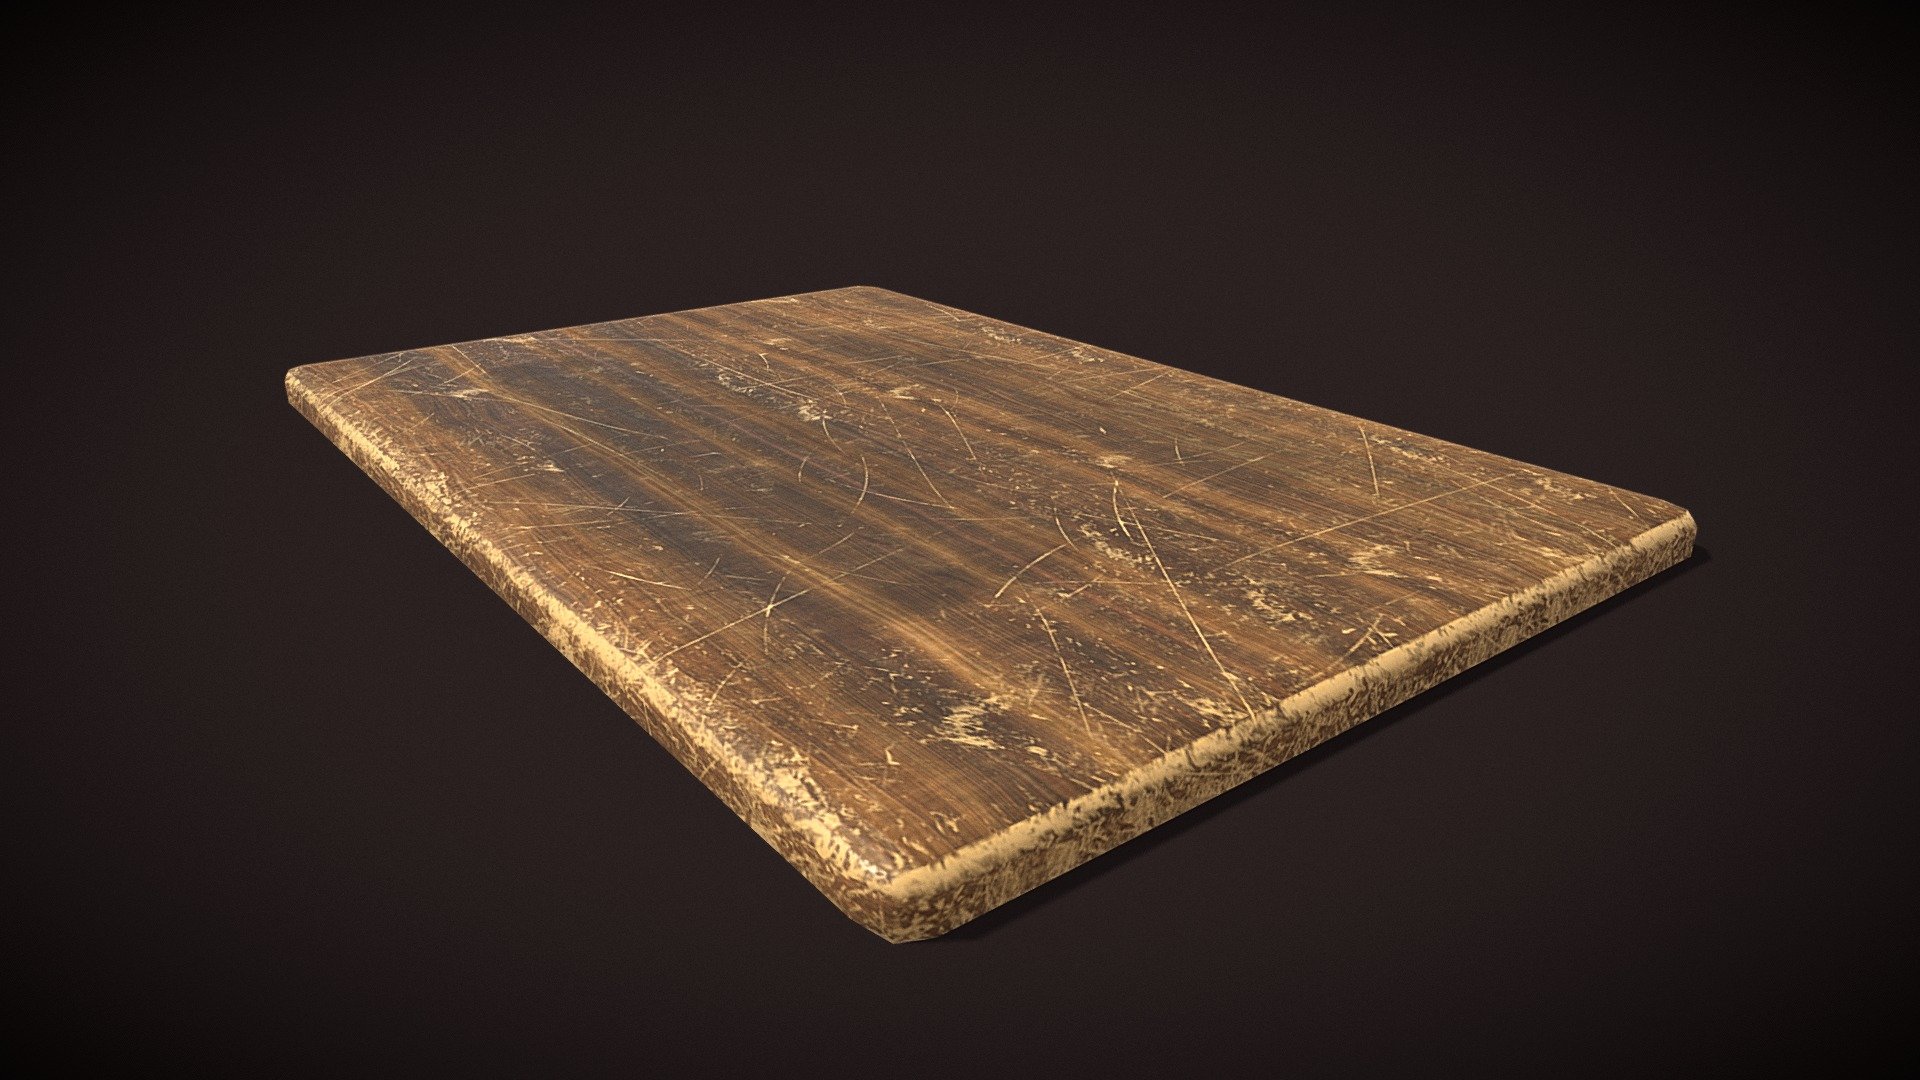 High Quality Wooden Cutting Board 3D Model Display your food items on a beautiful, detailed, wooden cutting board. High quality wooden cutting board for display for any occasion. Recommeneded for displaying cuttable items on cutting board in interior spaces such as kitchens or dining areas. PBR Texture 4096x4096 From the Creators at Get Dead Entertainment. Please Like and Rate. :) - Cutting Board - Buy Royalty Free 3D model by GetDeadEntertainment 3d model